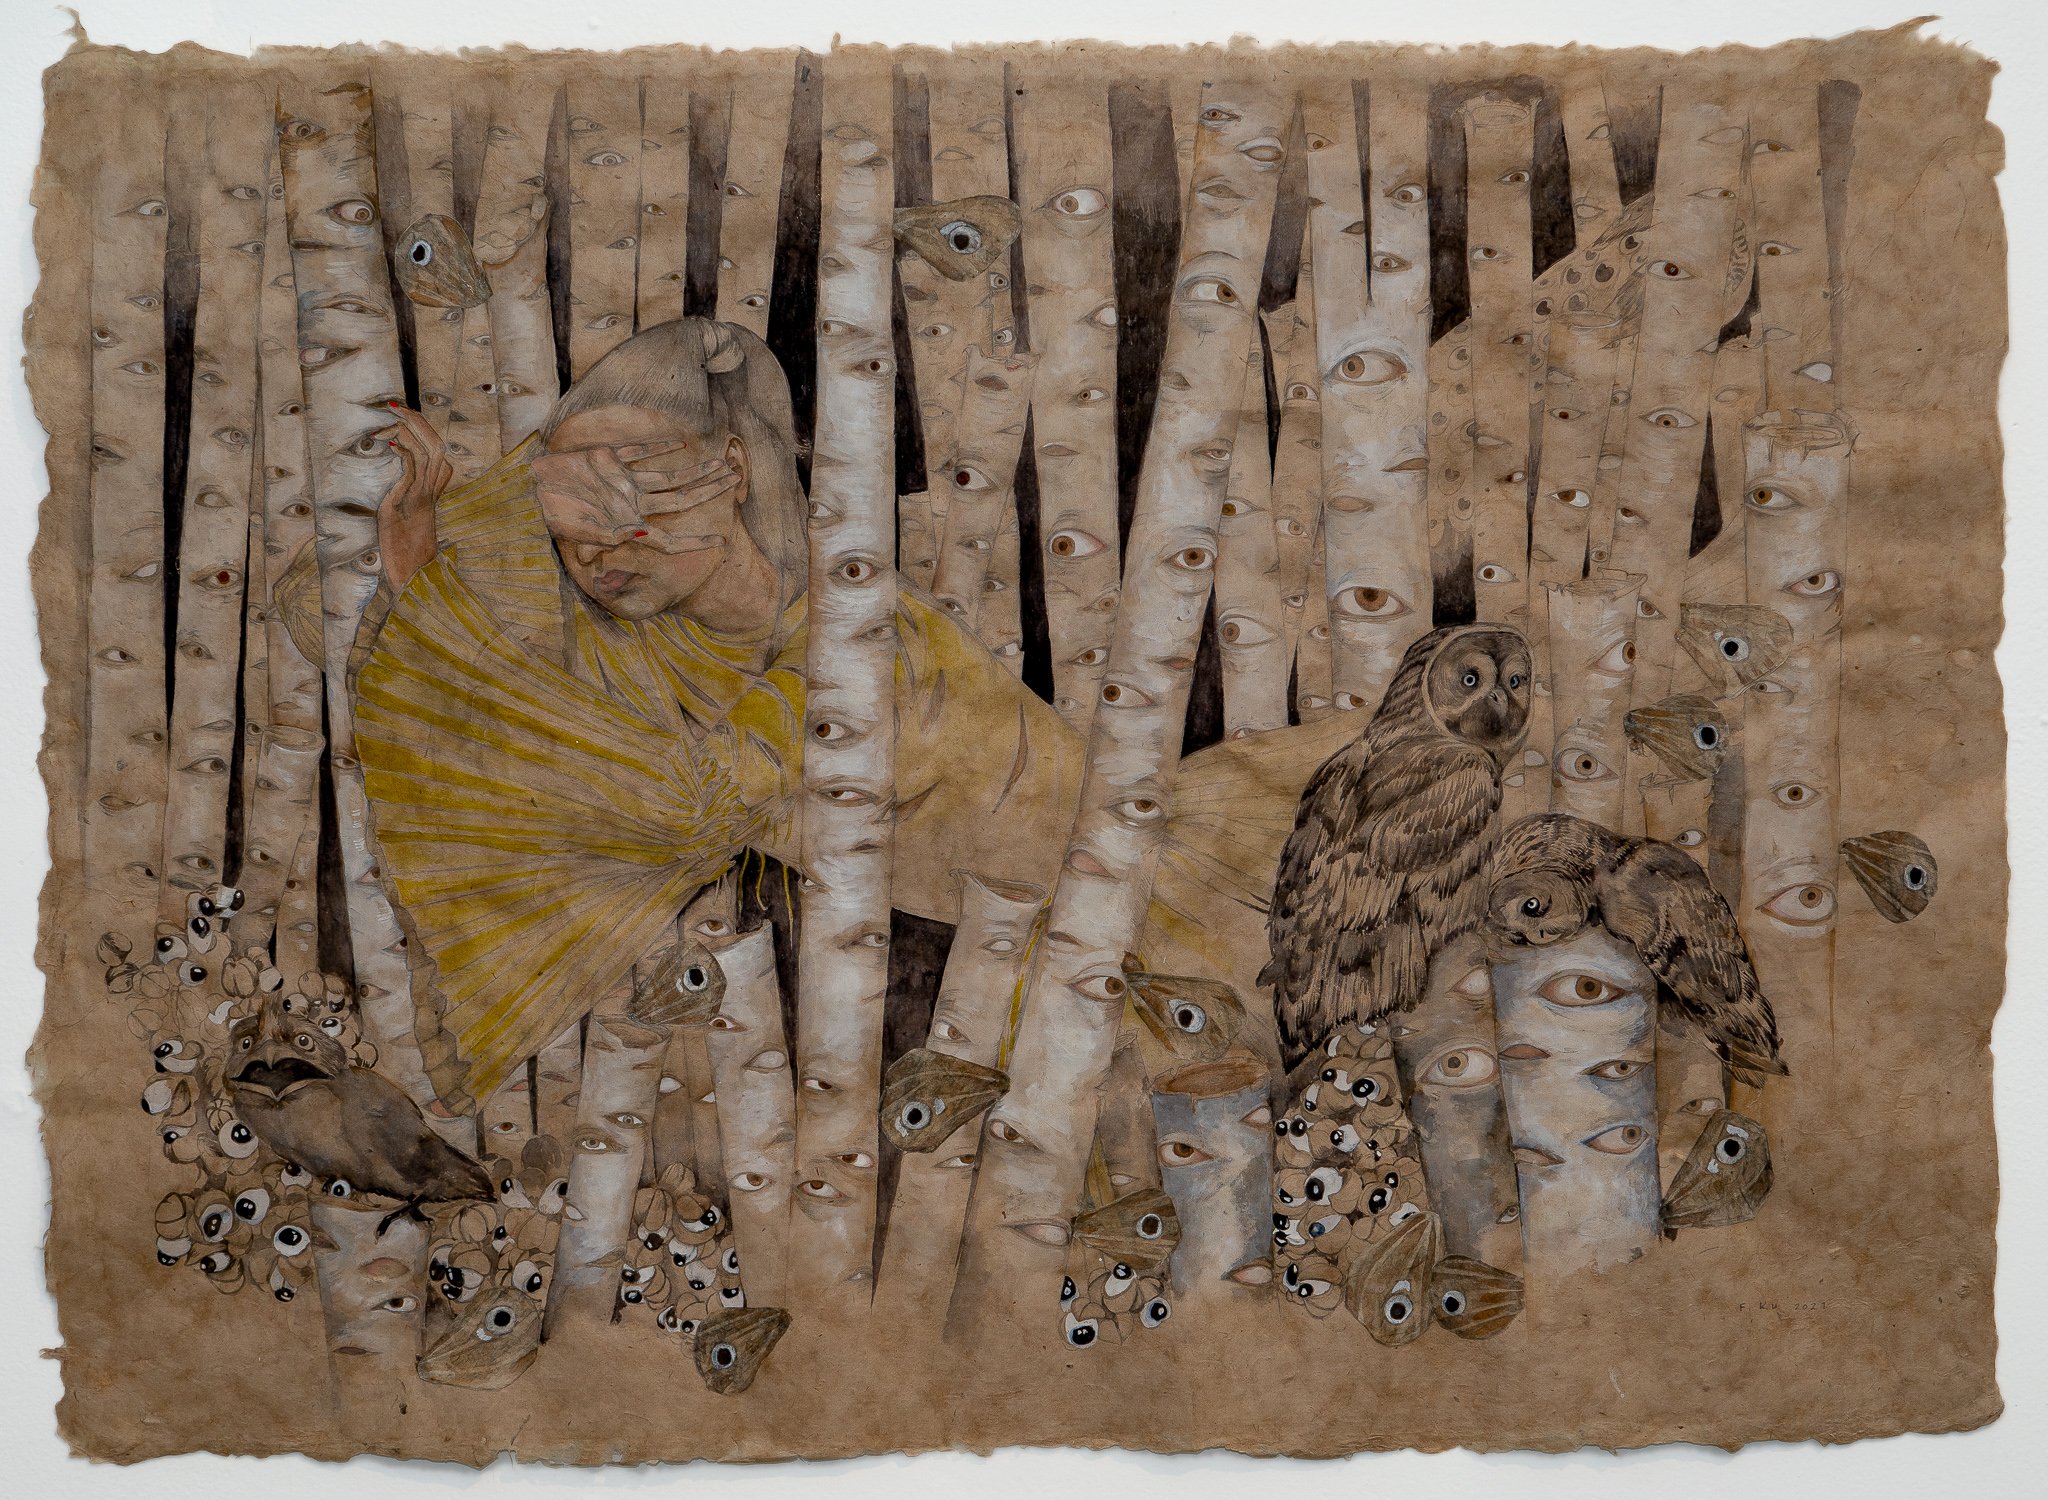   See For The Trees,  2021 23.5 x 32 inches Graphite, watercolor, cut paper and glue on Bhutan handmade paper 